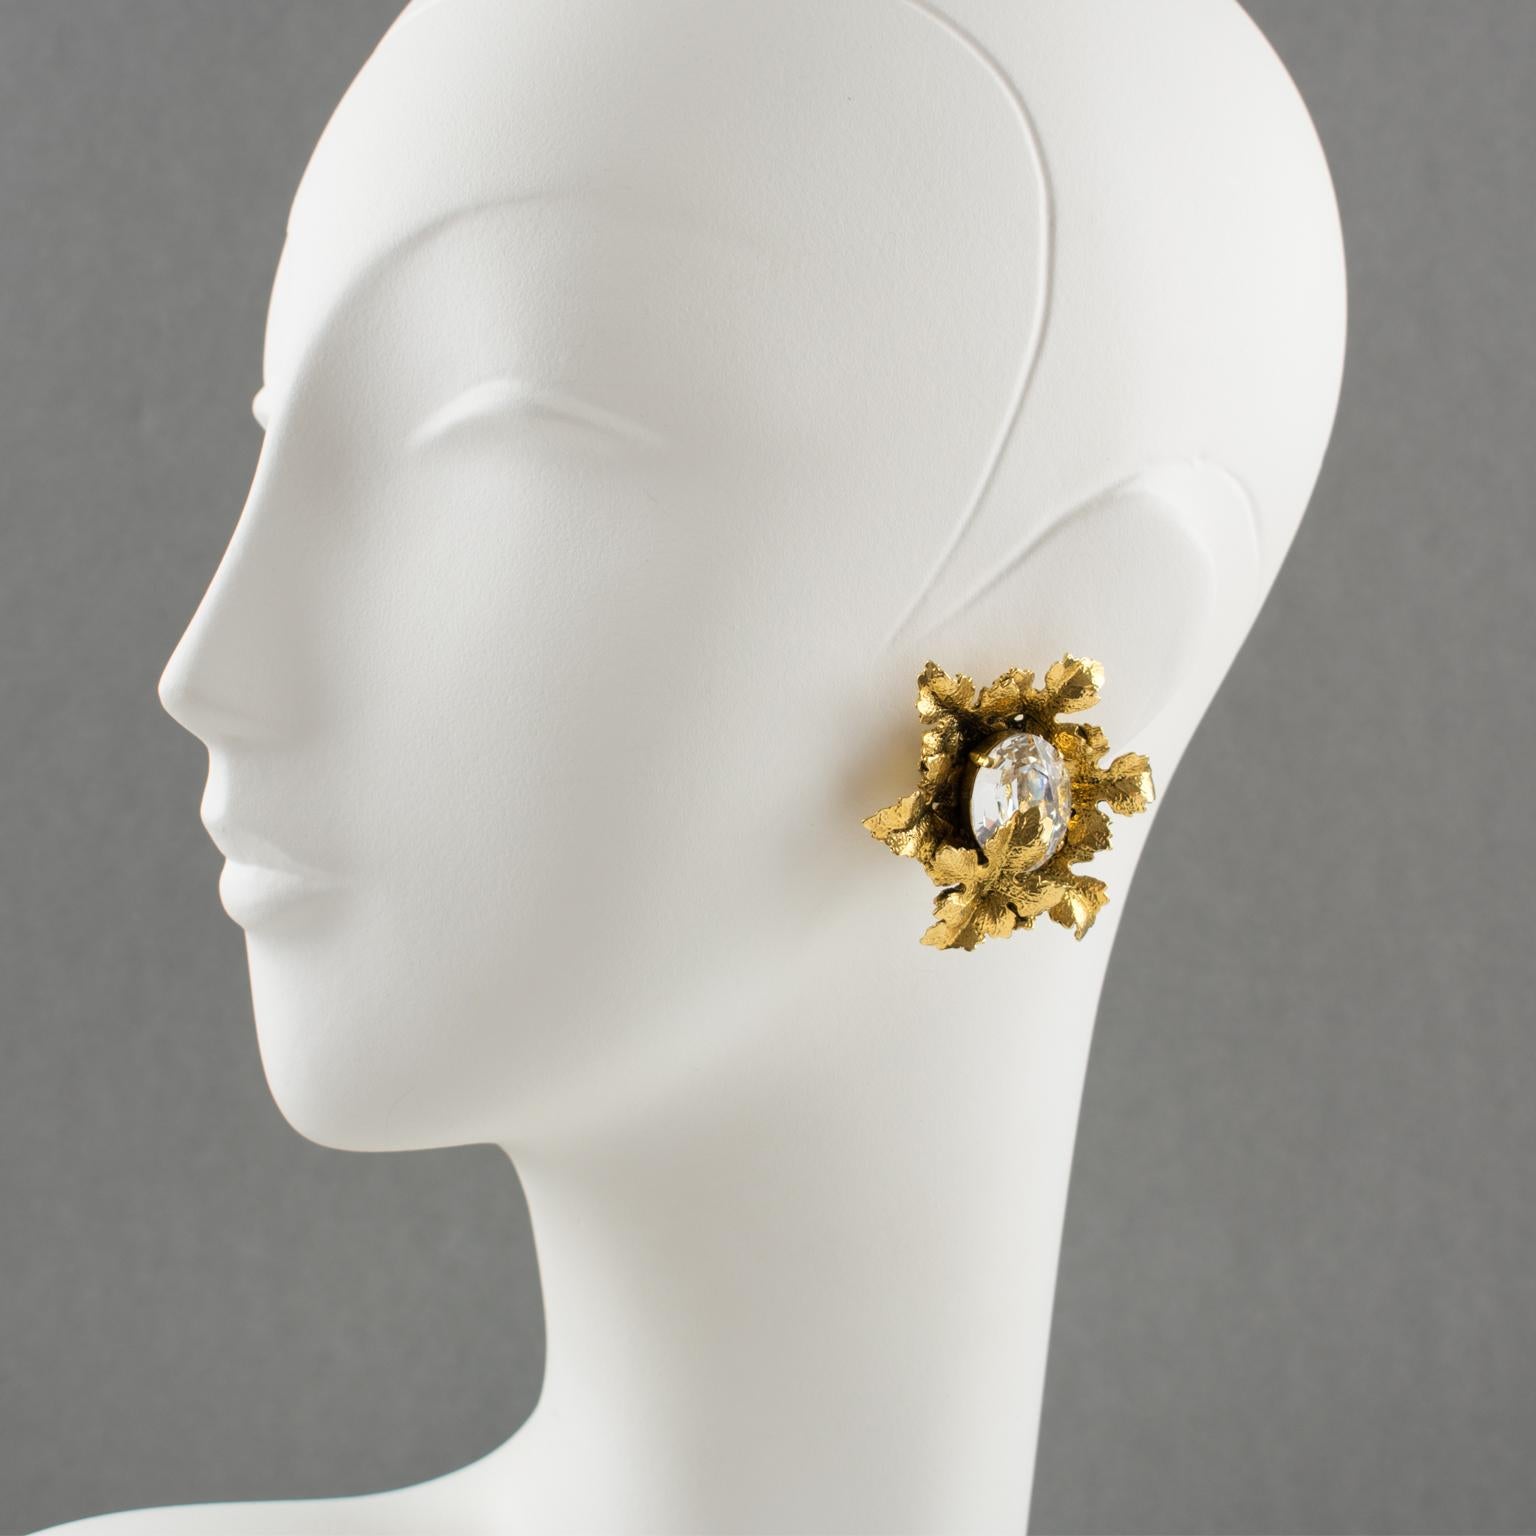 Lovely French fashion designer Sonia Rykiel Paris signed clip-on earrings. Featuring dimensional gilt metal leaves carved design with texture topped with extra-large crystal clear rhinestone. Signed underside with gilded tag: Sonia Rykiel - Paris.